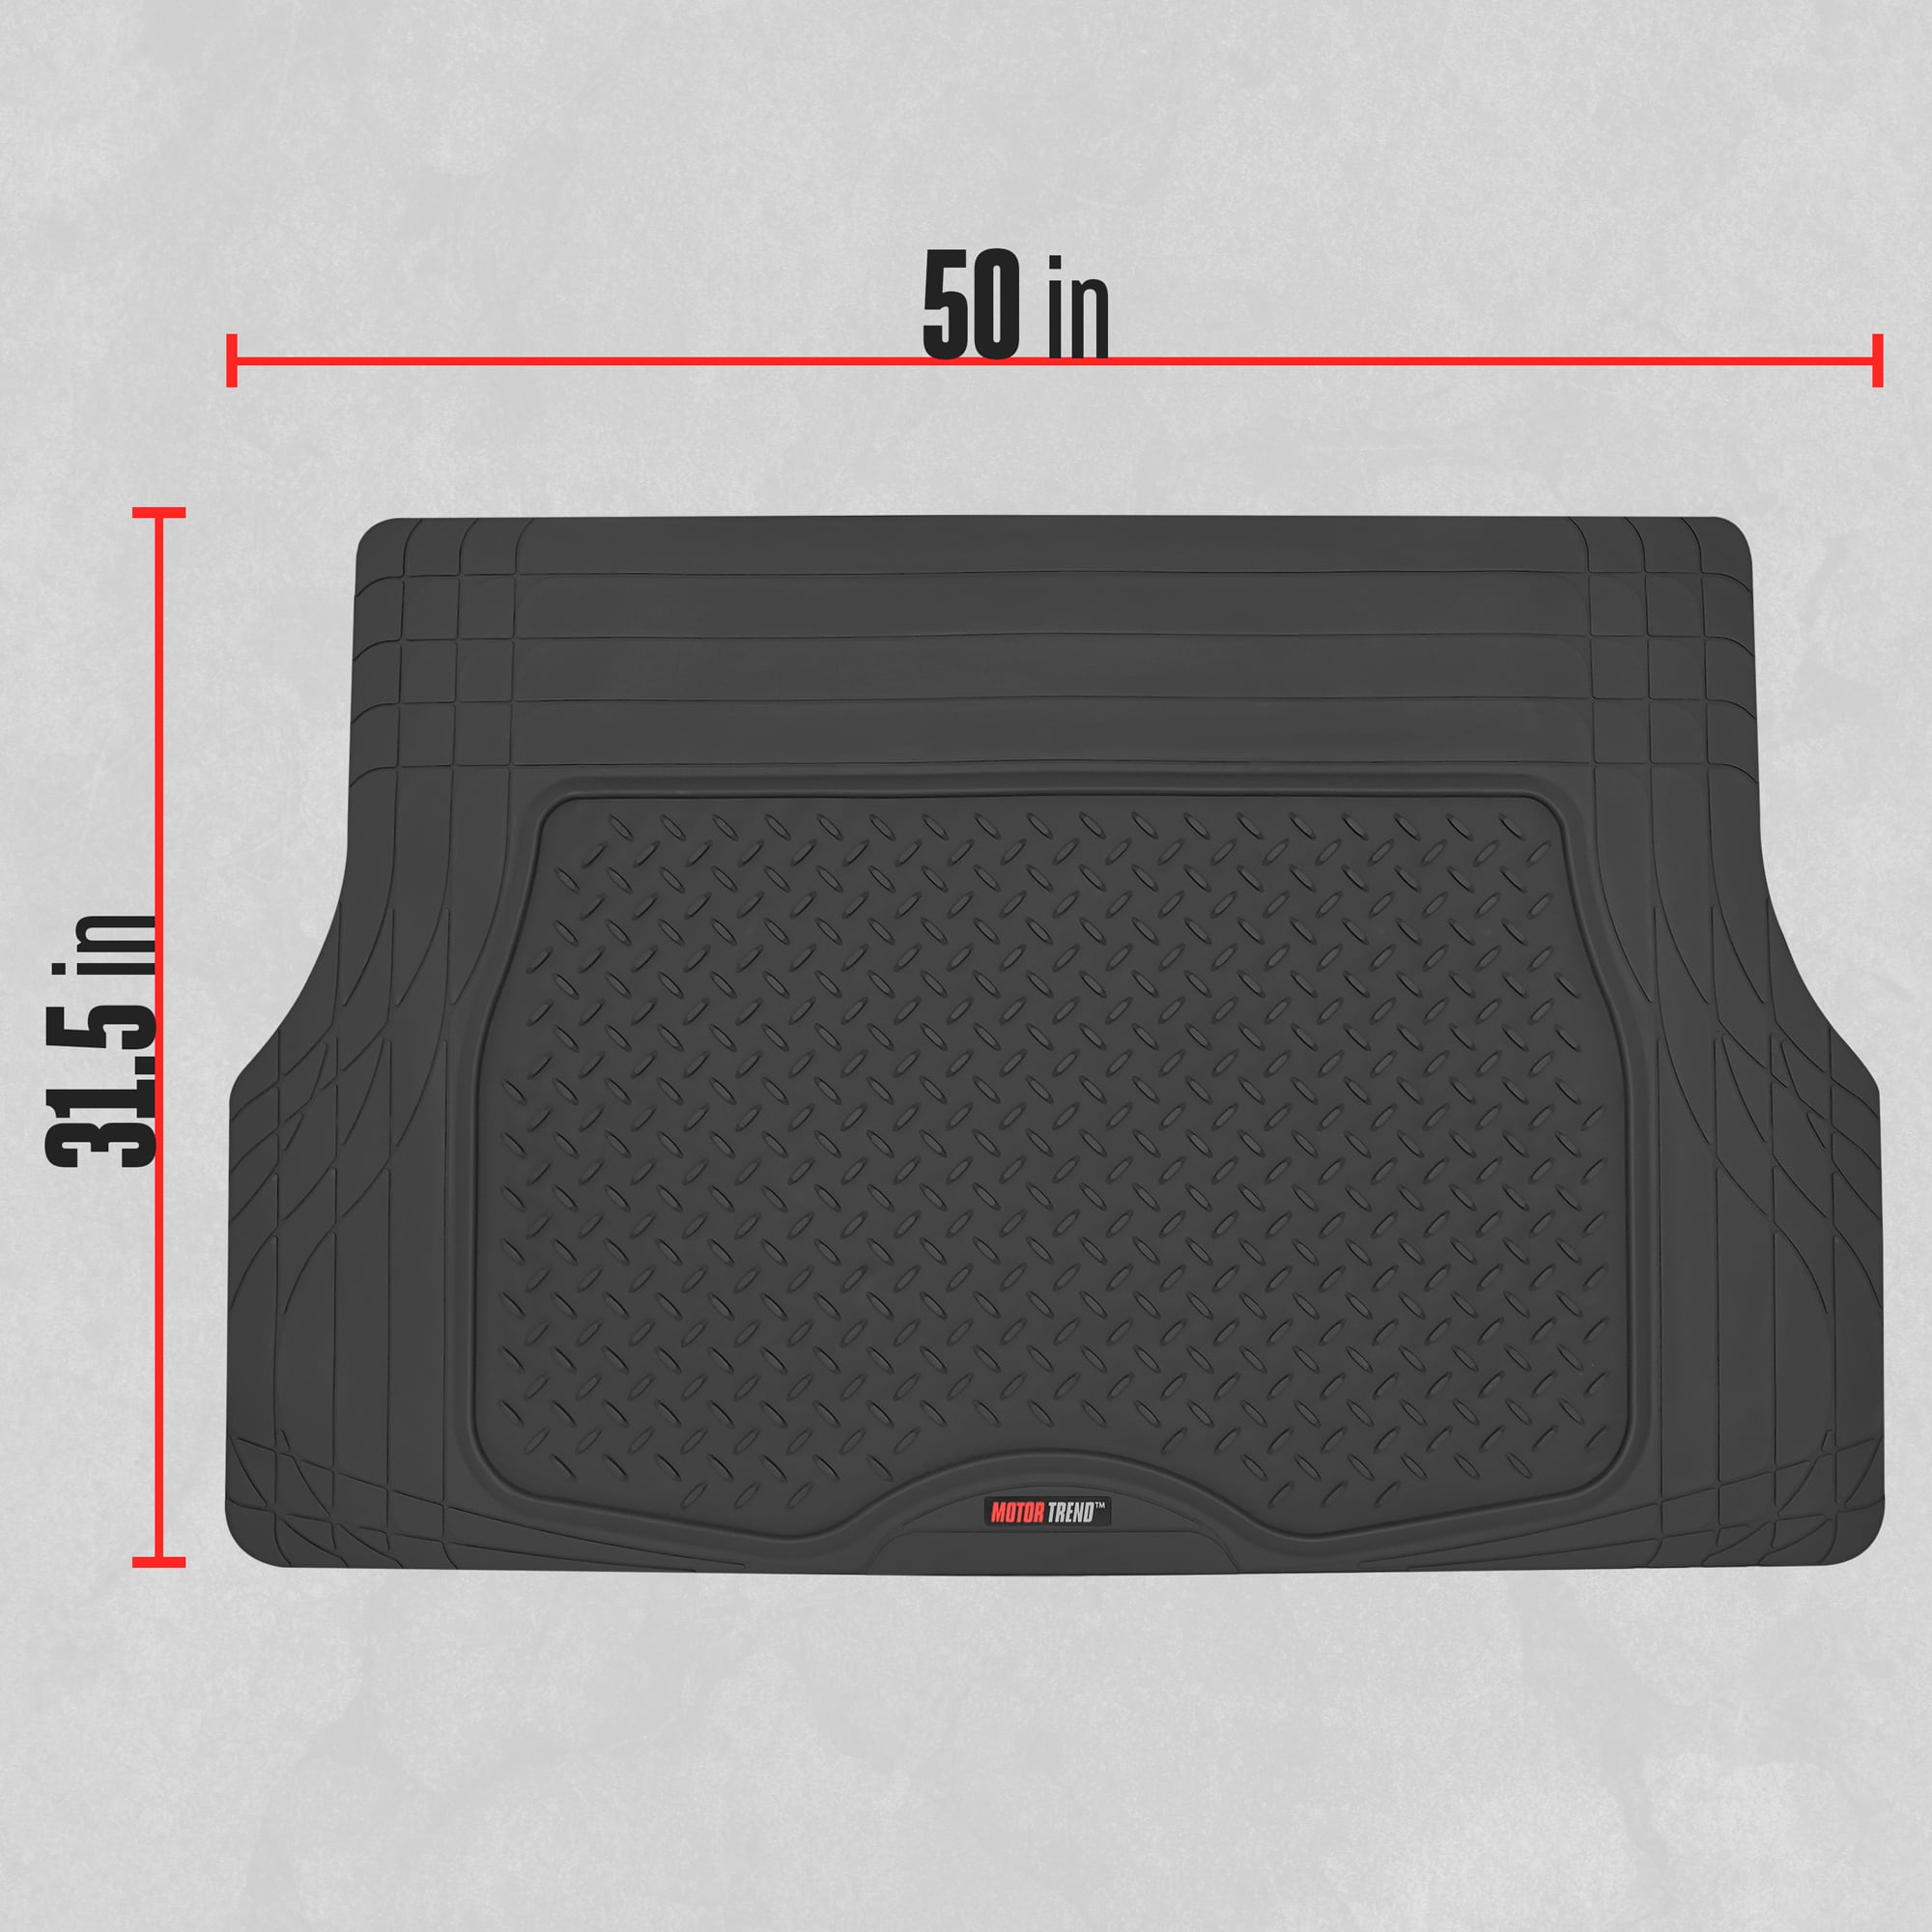 Metropolitan analyse zonde Motor Trend Heavy Duty Utility Cargo Liner Floor Mats for Car Truck SUV,  Trimmable to Fit Trunk, All Weather Protection - Walmart.com